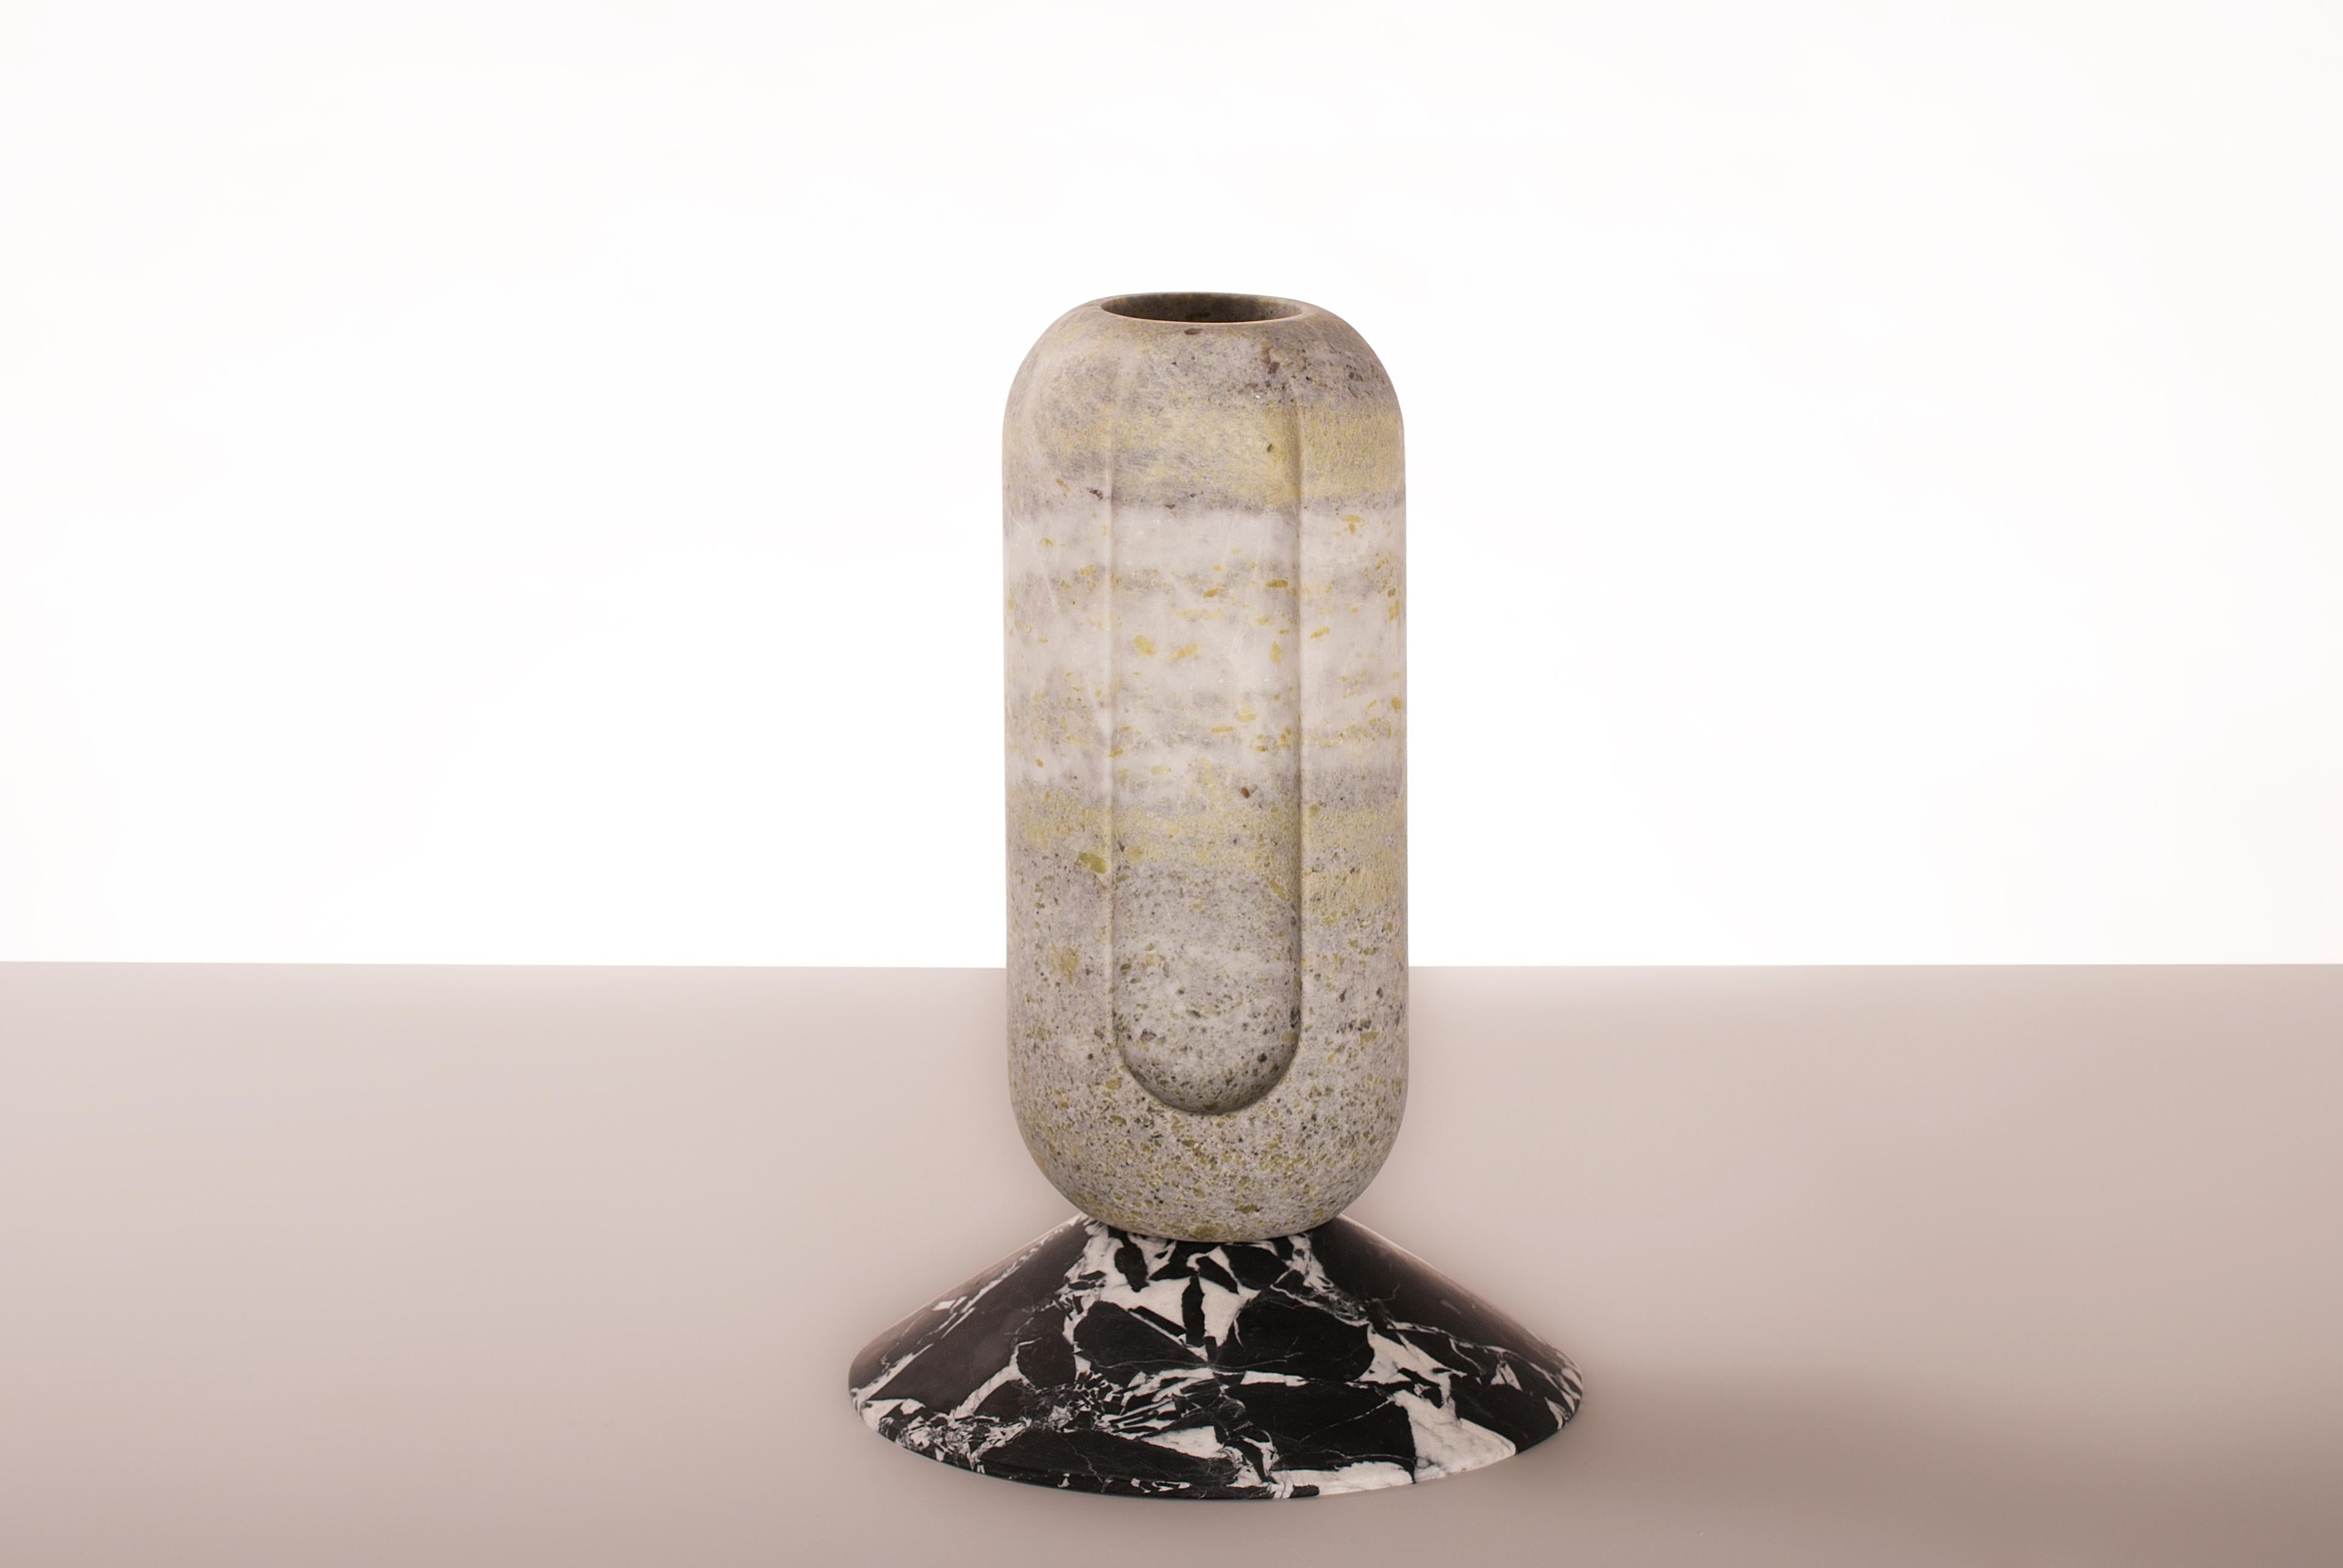 Cassus - Marble Contemporary Vase - Valentina Cameranesi
Materials: Noir Antique + Green Jade (Also available in White Carrara marble )
Dimensions: 36 x 24 x 24 cm.

The “Avalon” series consists of 3 sculptural vases, made of White Arabescato